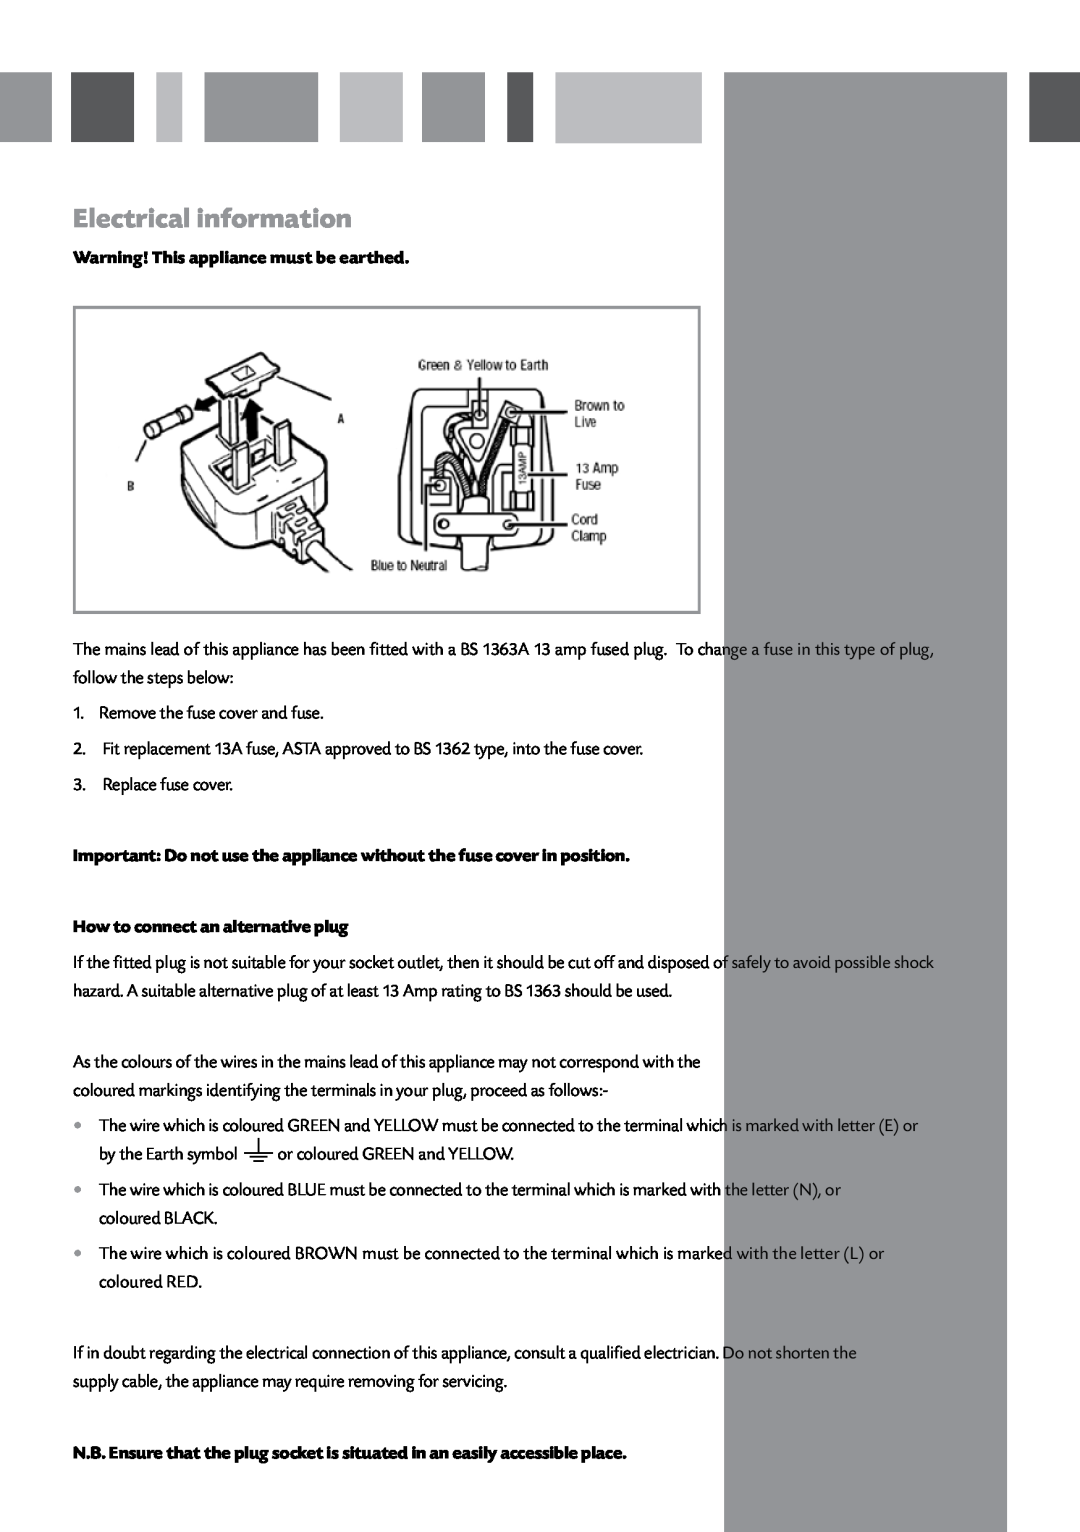 CDA FF120 manual Electrical information, Warning! This appliance must be earthed, How to connect an alternative plug 